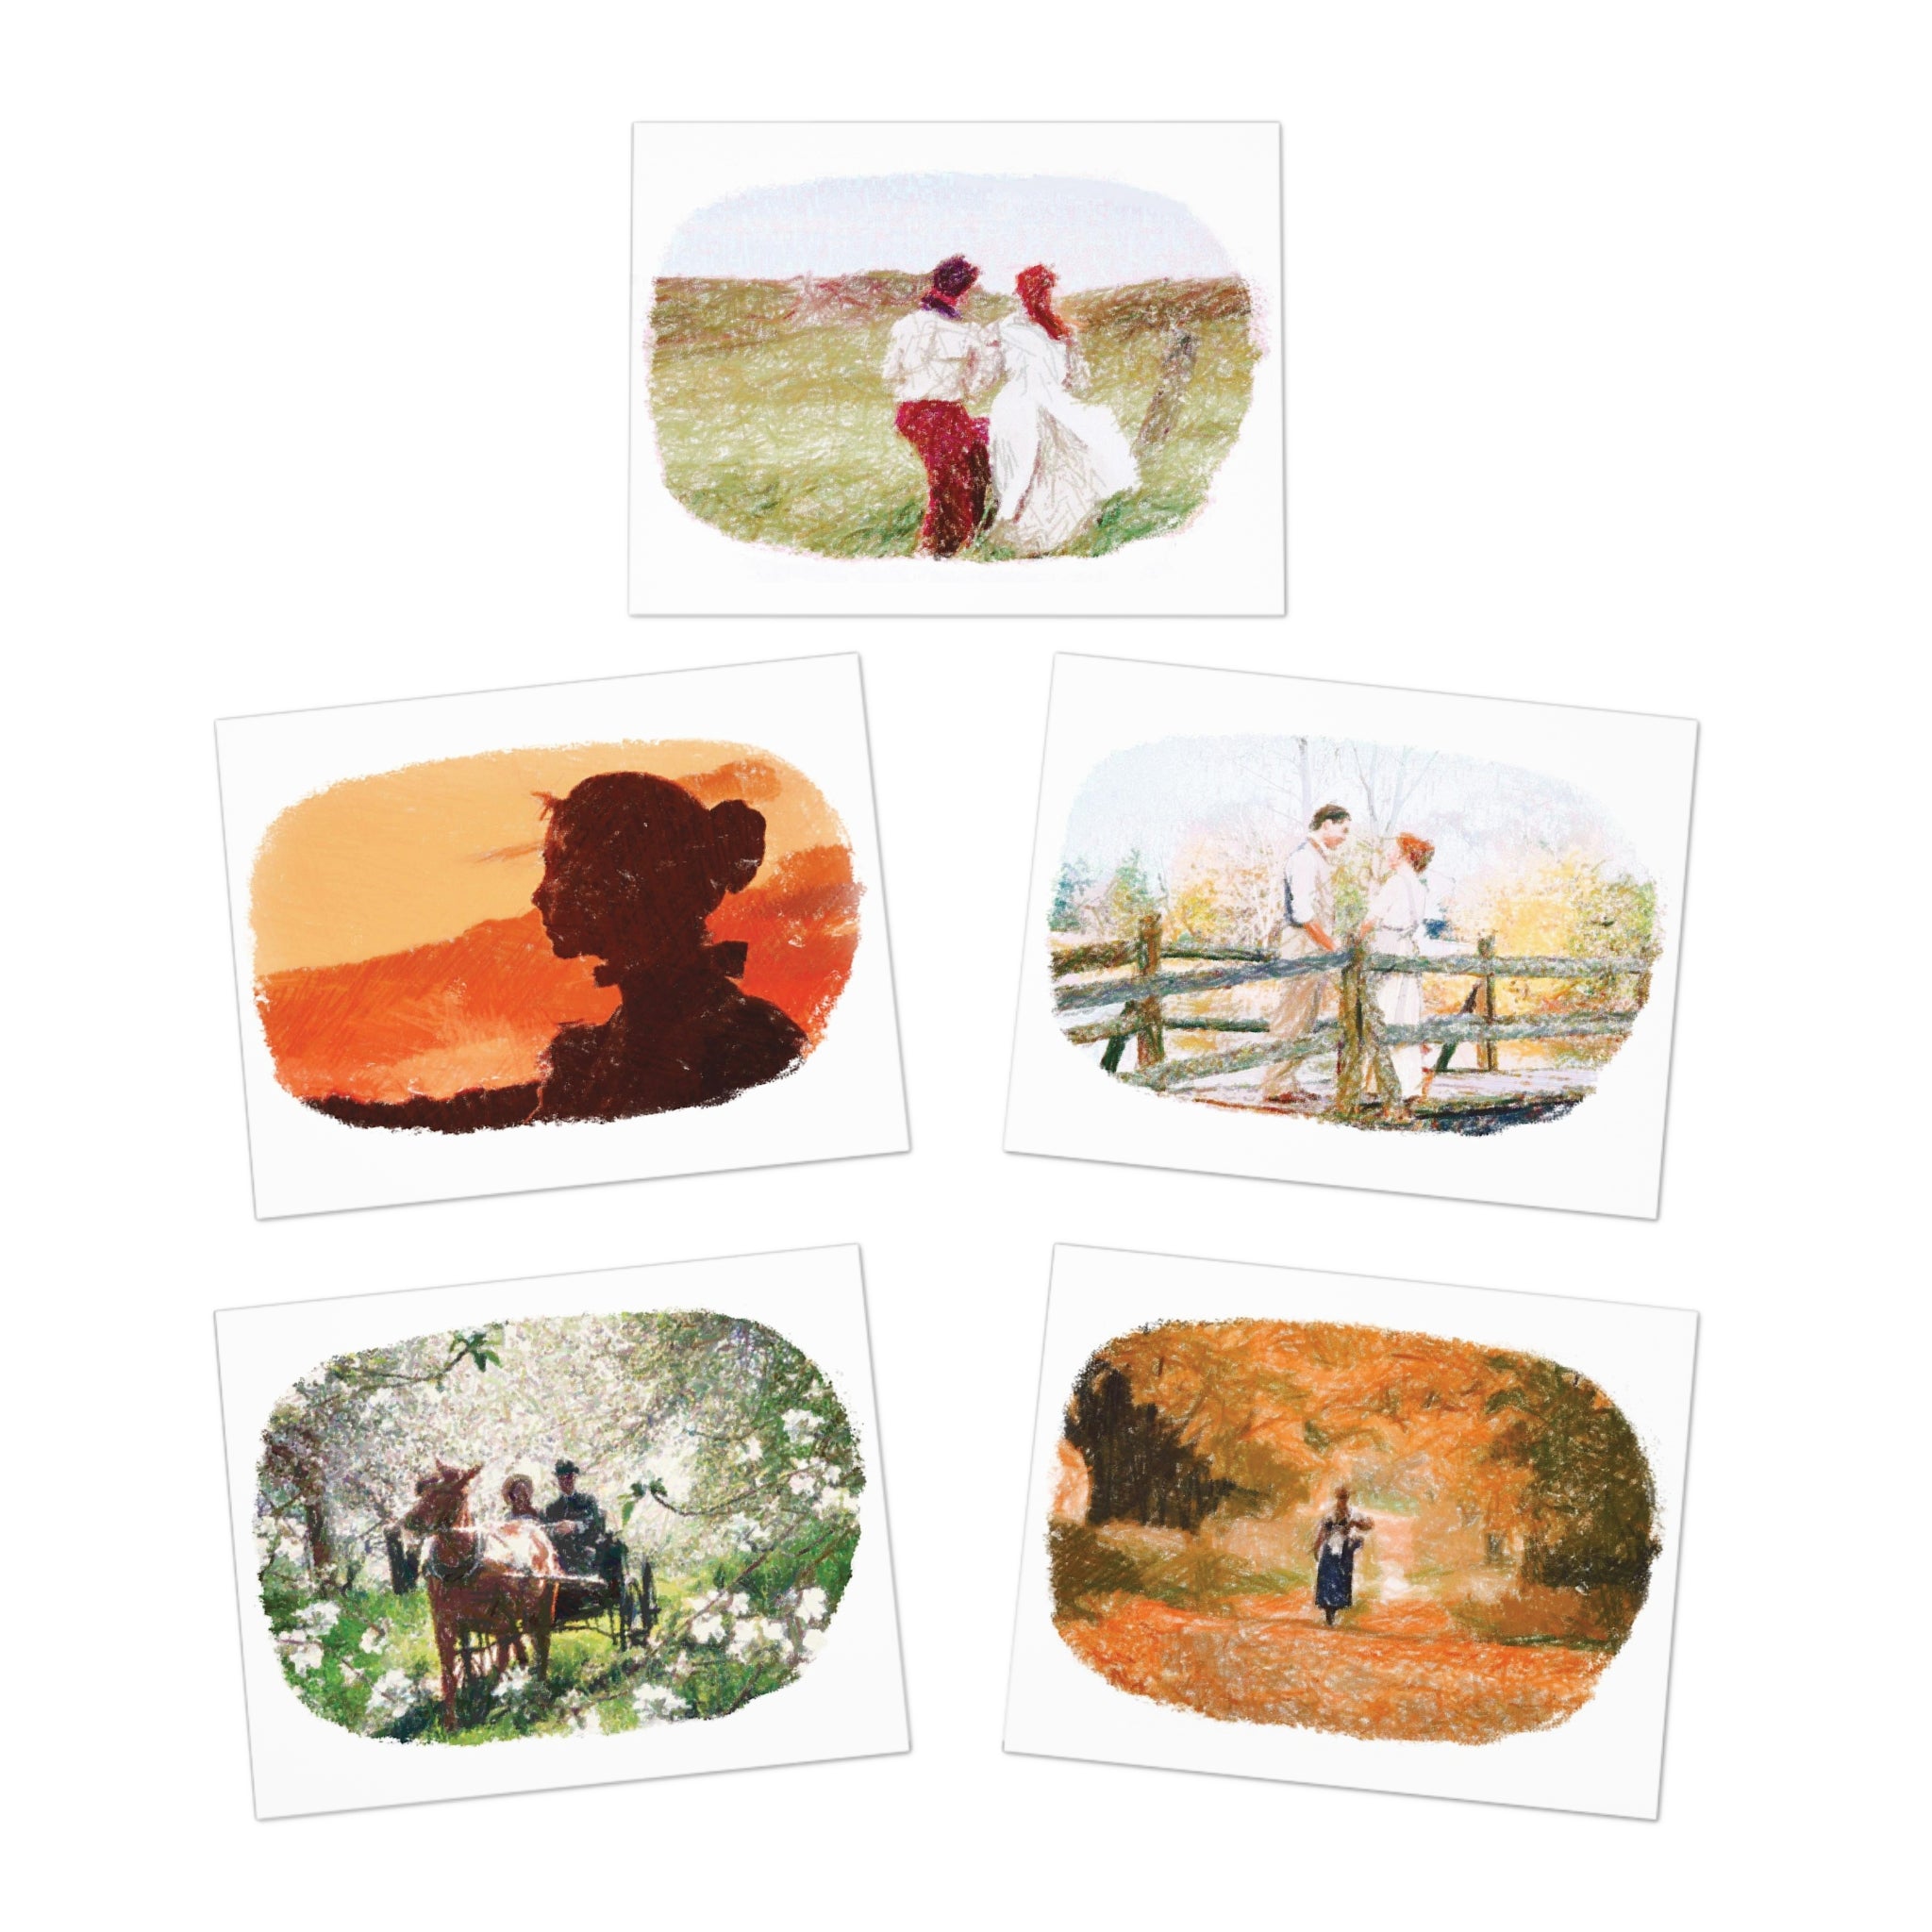 "Anne of Green Gables" 5 Pack Pencil Sketch Greeting Cards